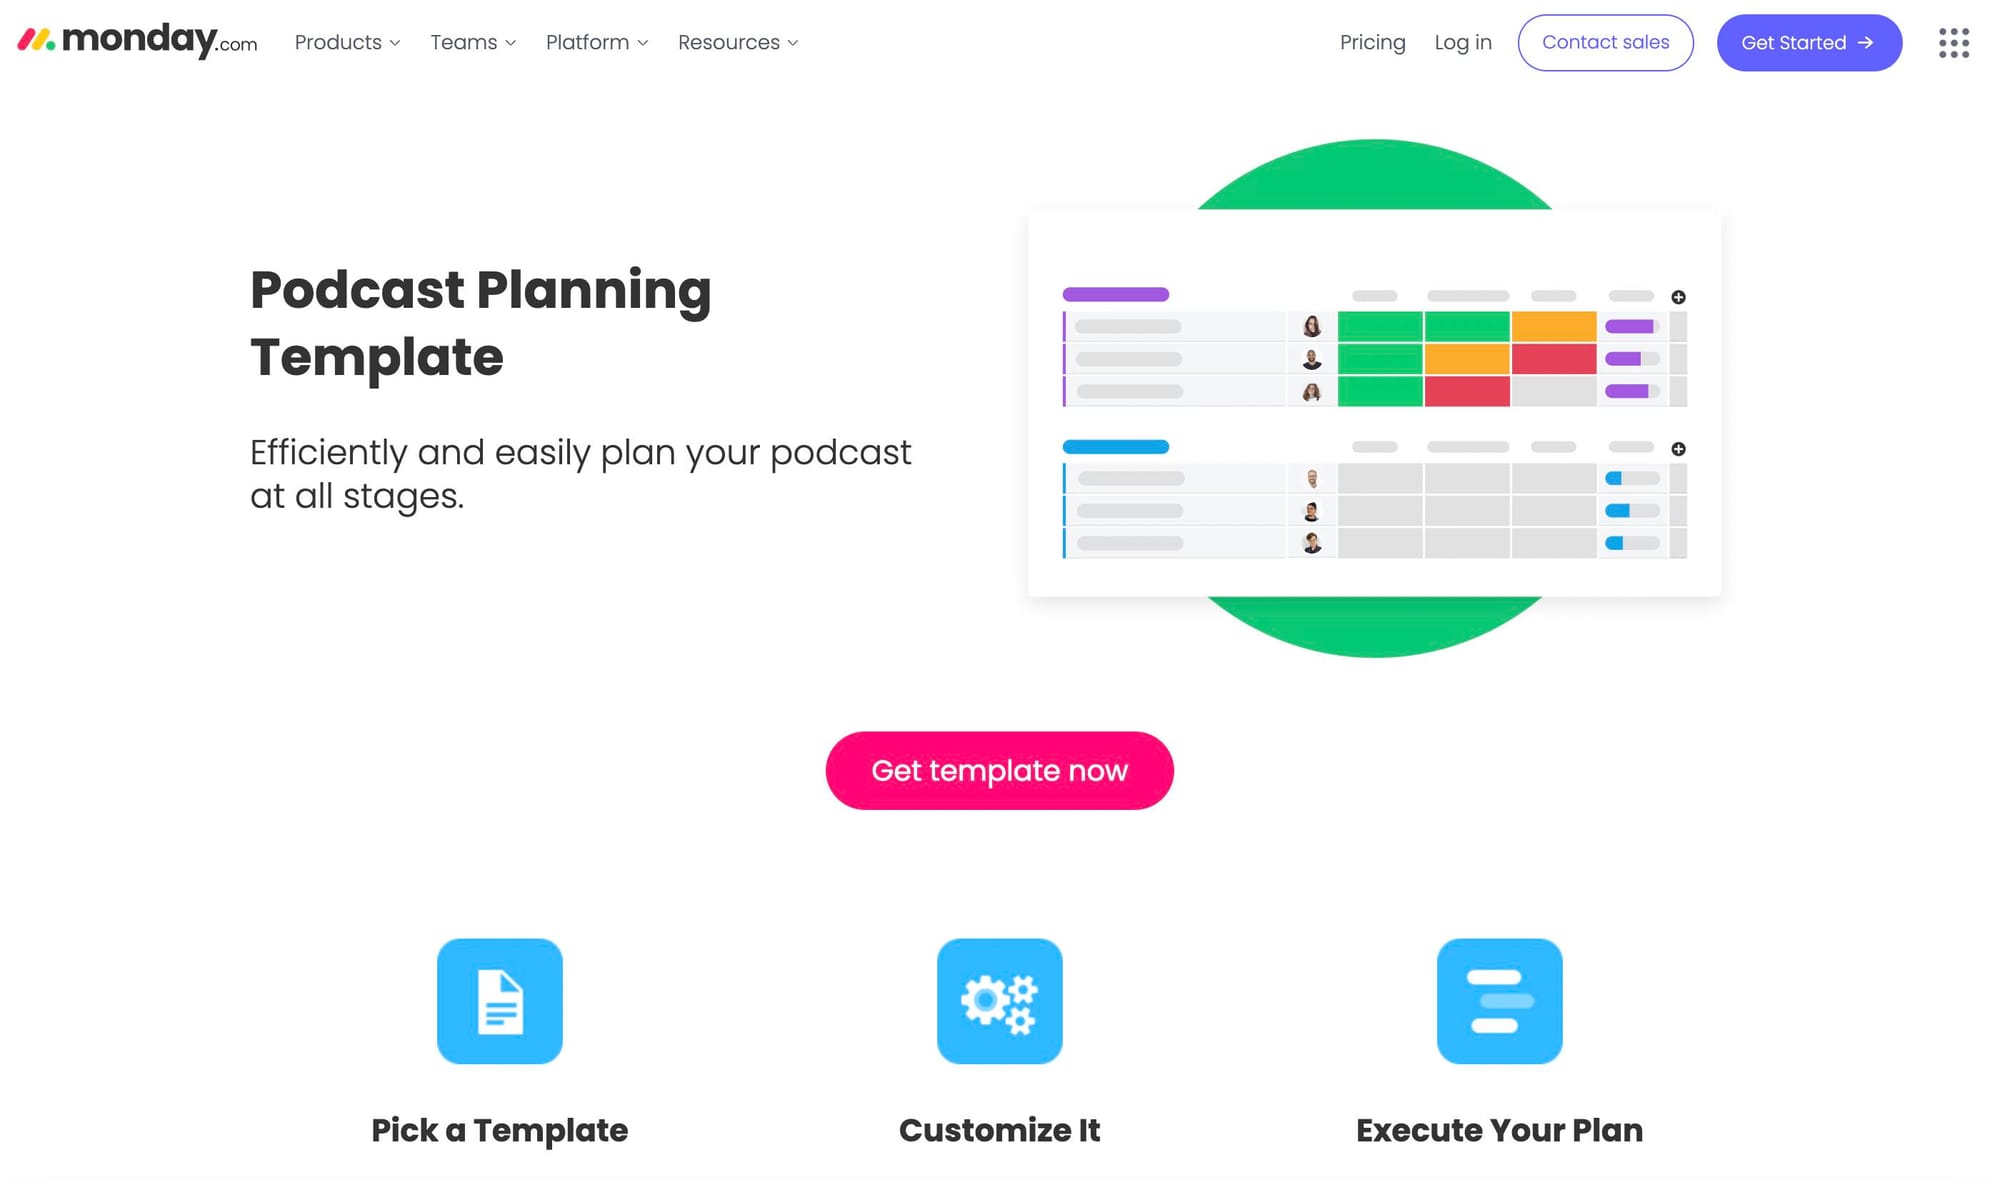 Monday.com's Podcast Planning template